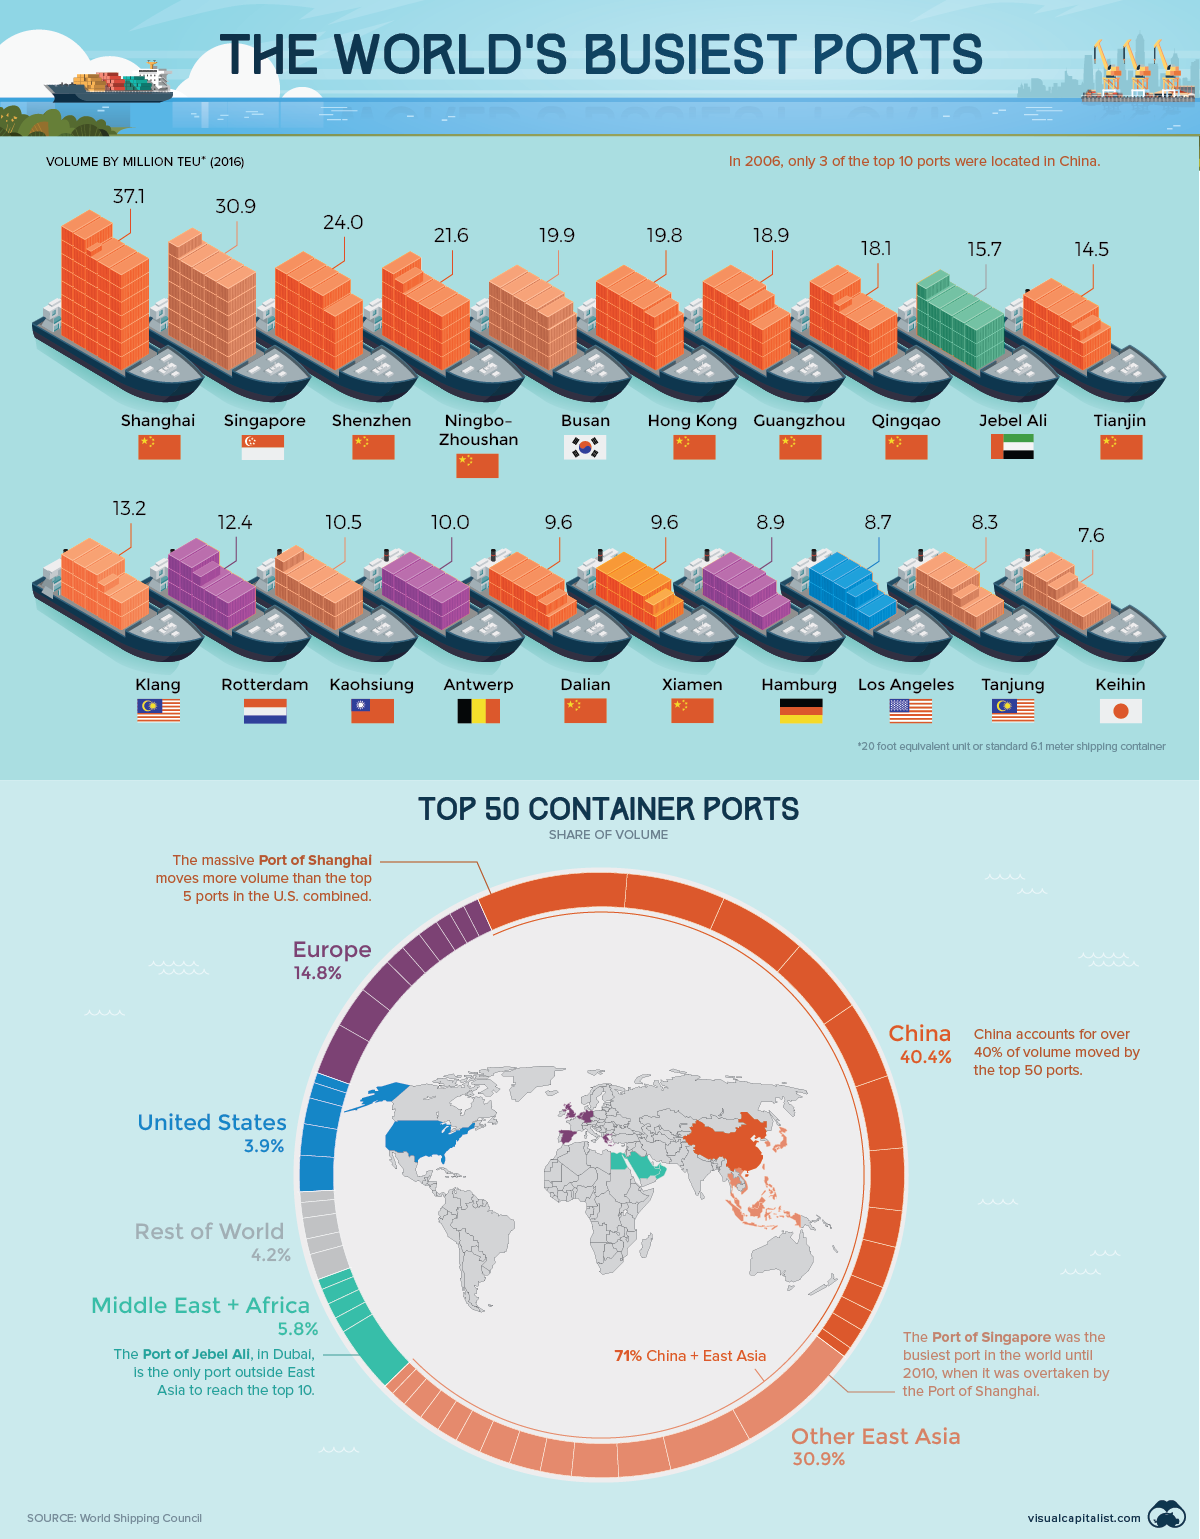 World's busiest ports